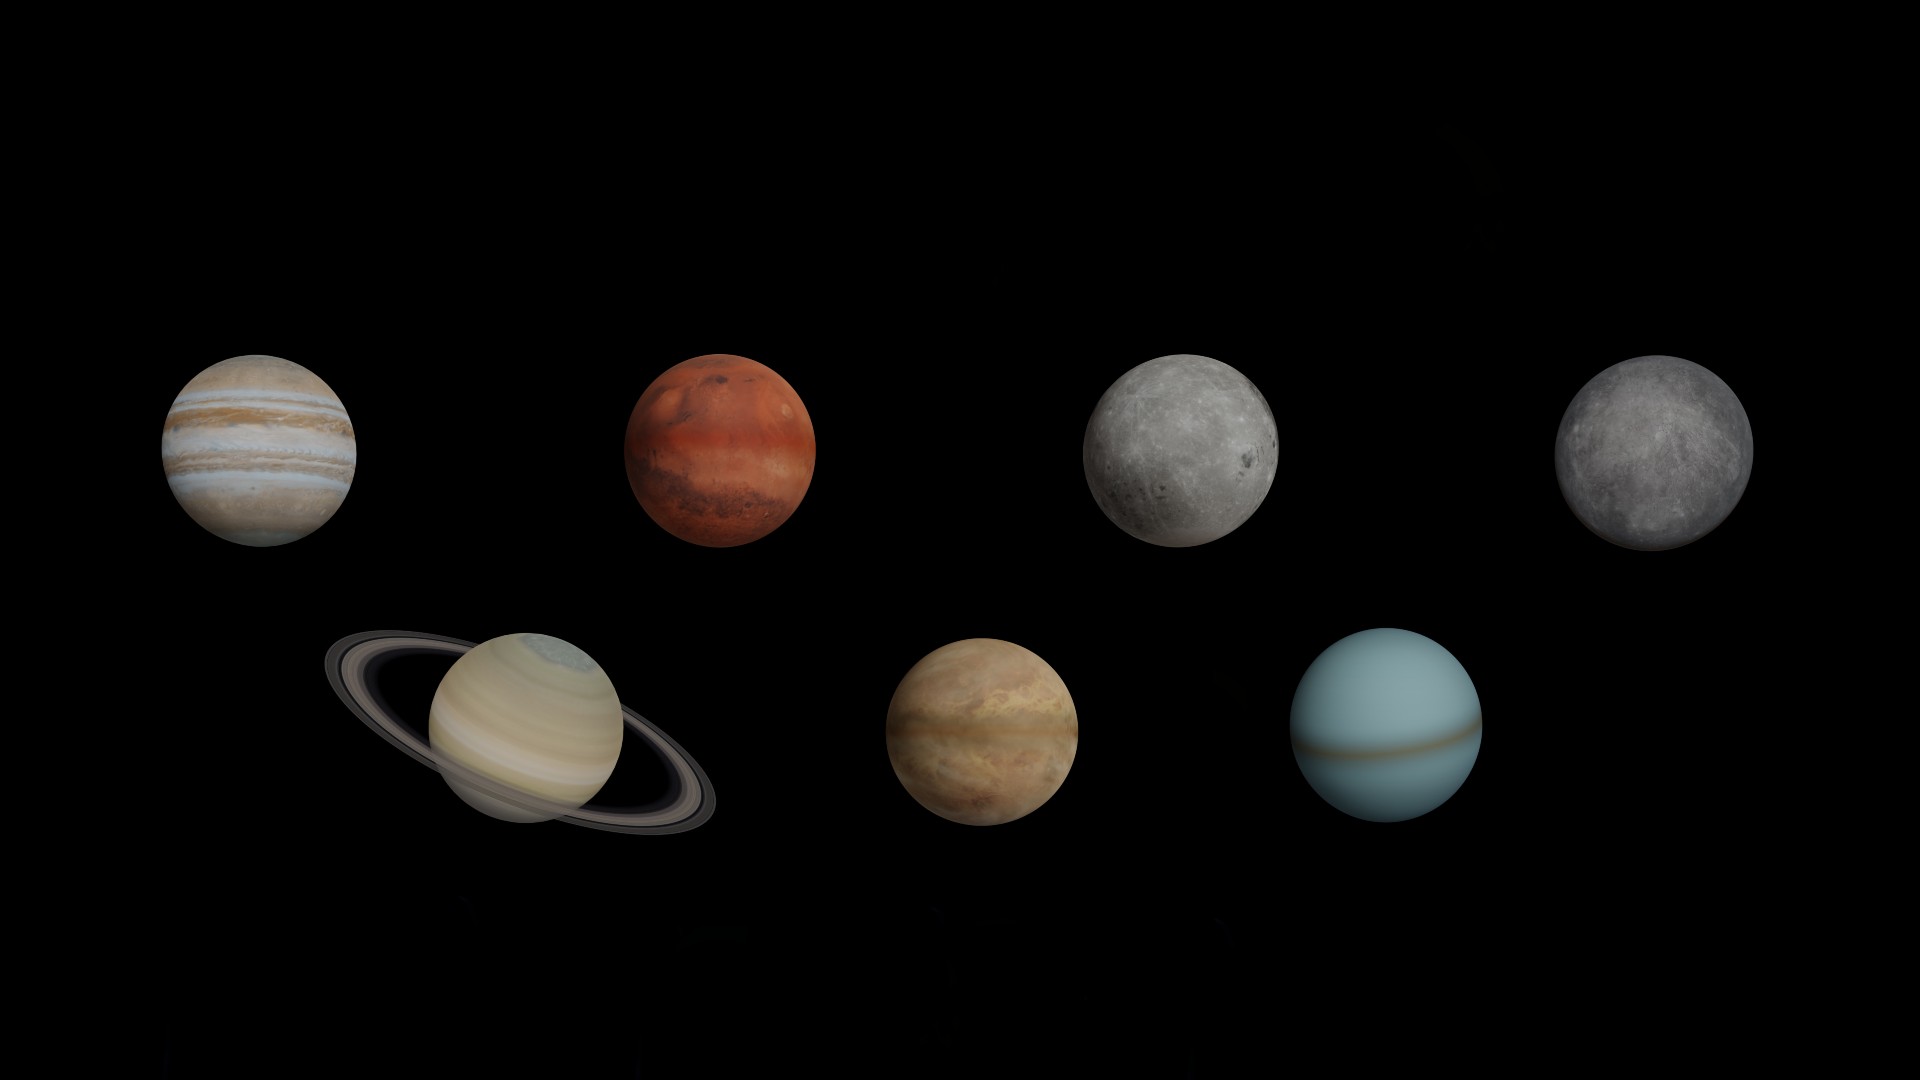 Every planet in the solar system will be visible on Wednesday (Dec. 28). Here's how to see them